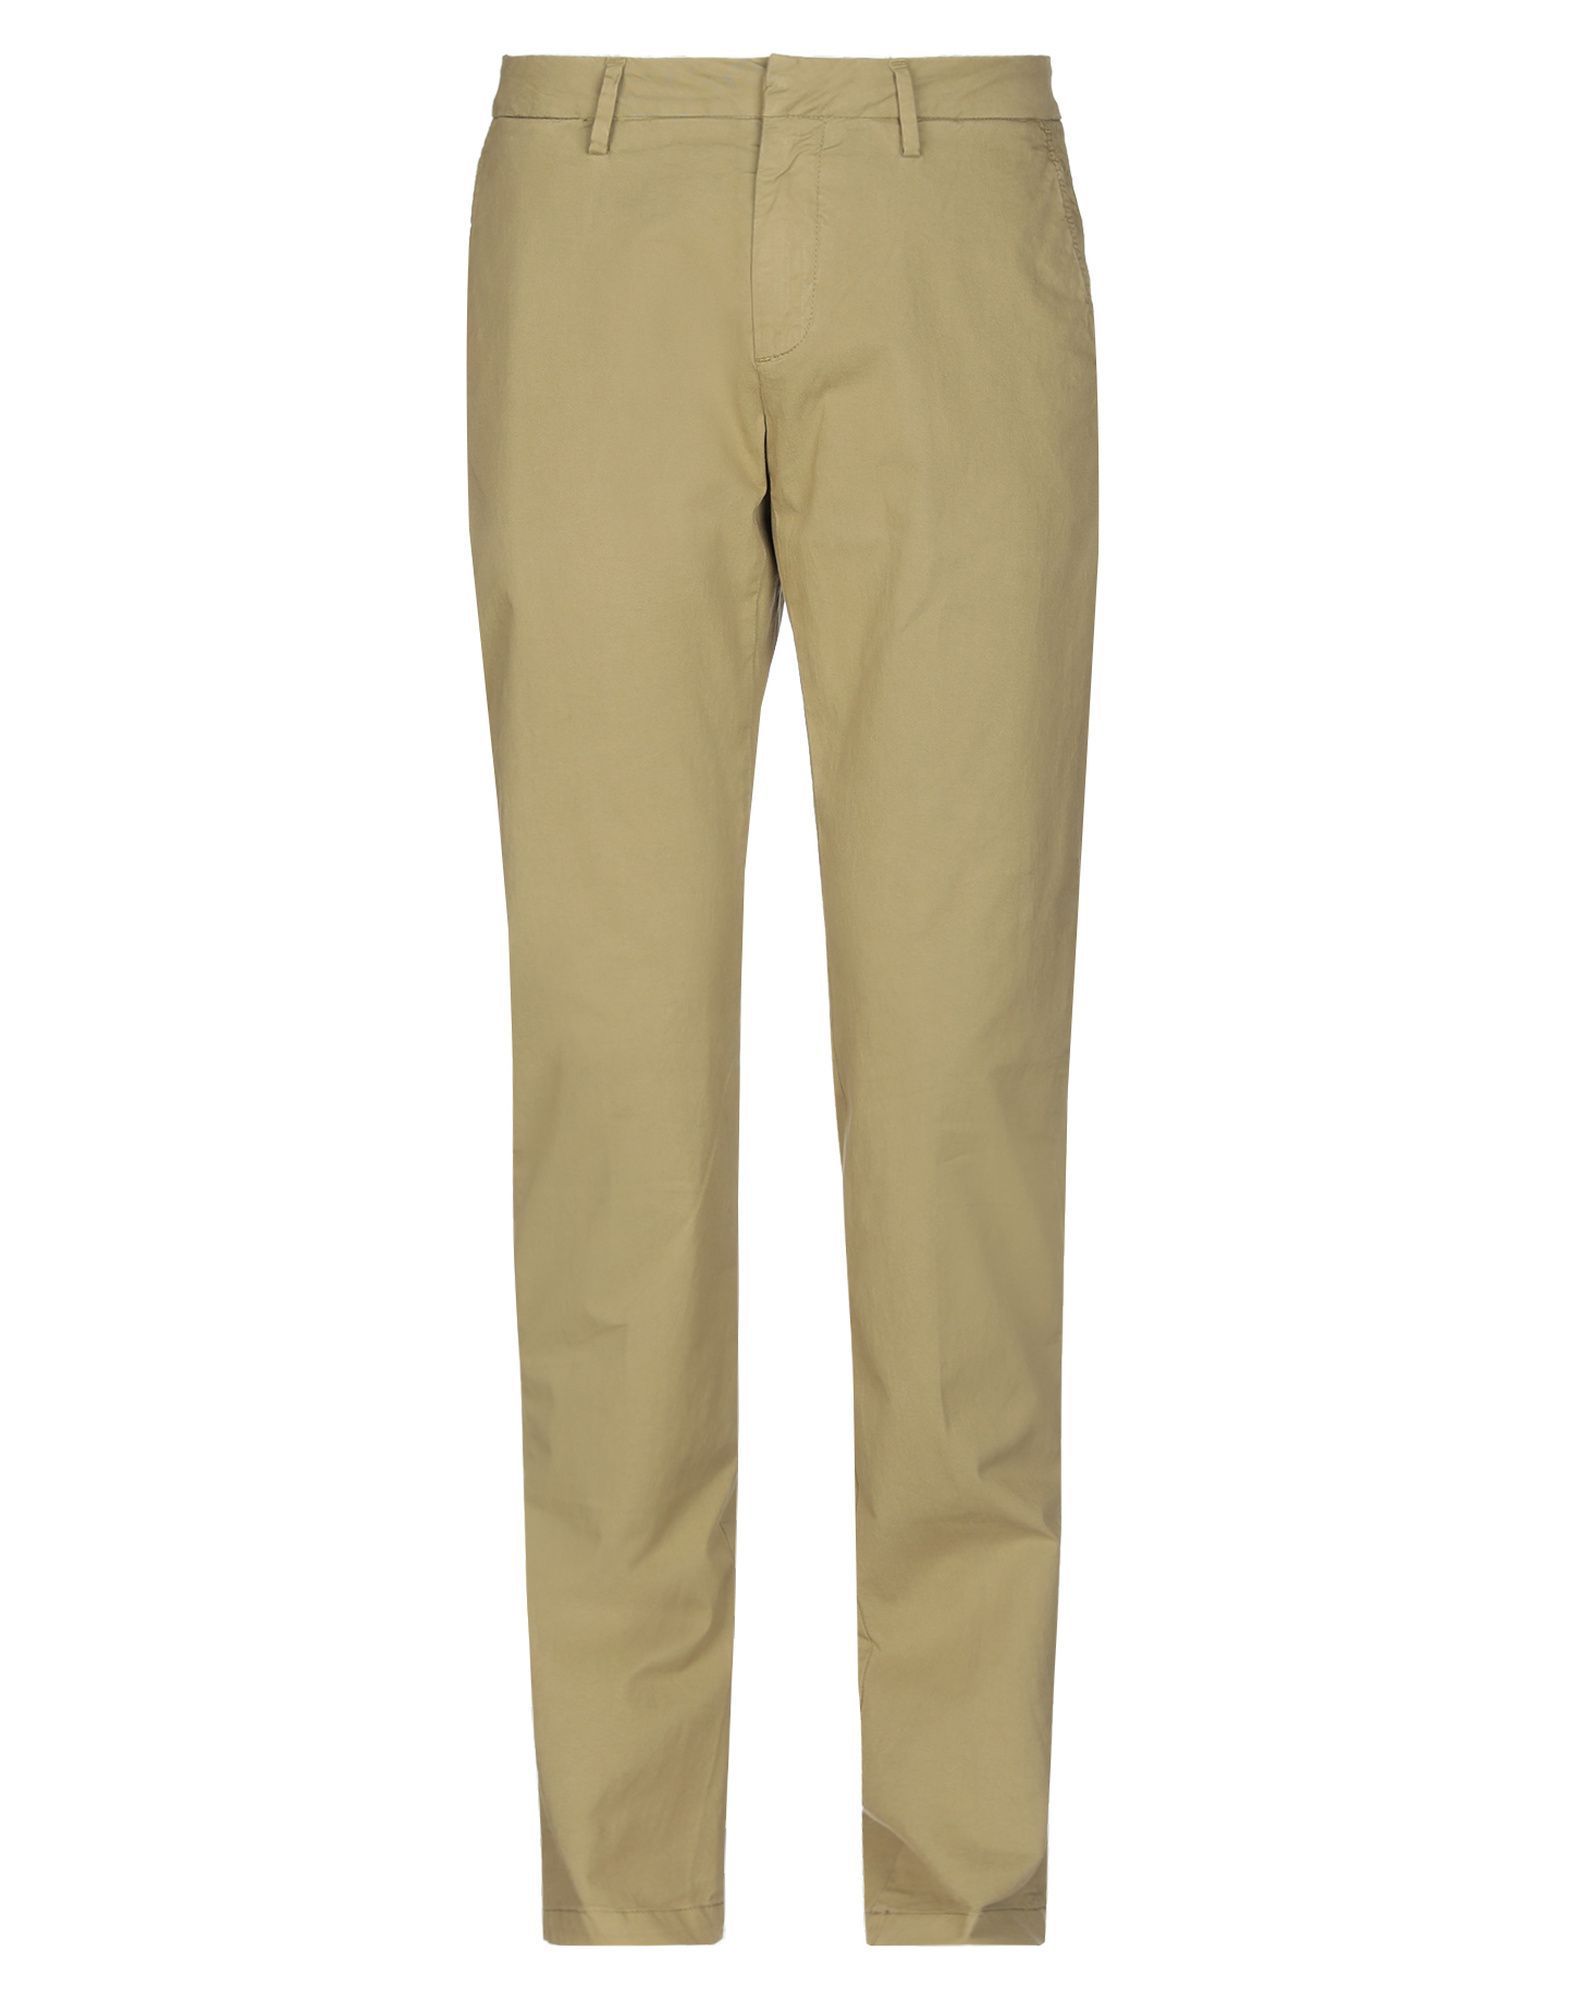 gabardine, solid colour, mid rise, slim fit, tapered leg, no appliqués, hook-and-bar, zip, multipockets, chinos, large sized